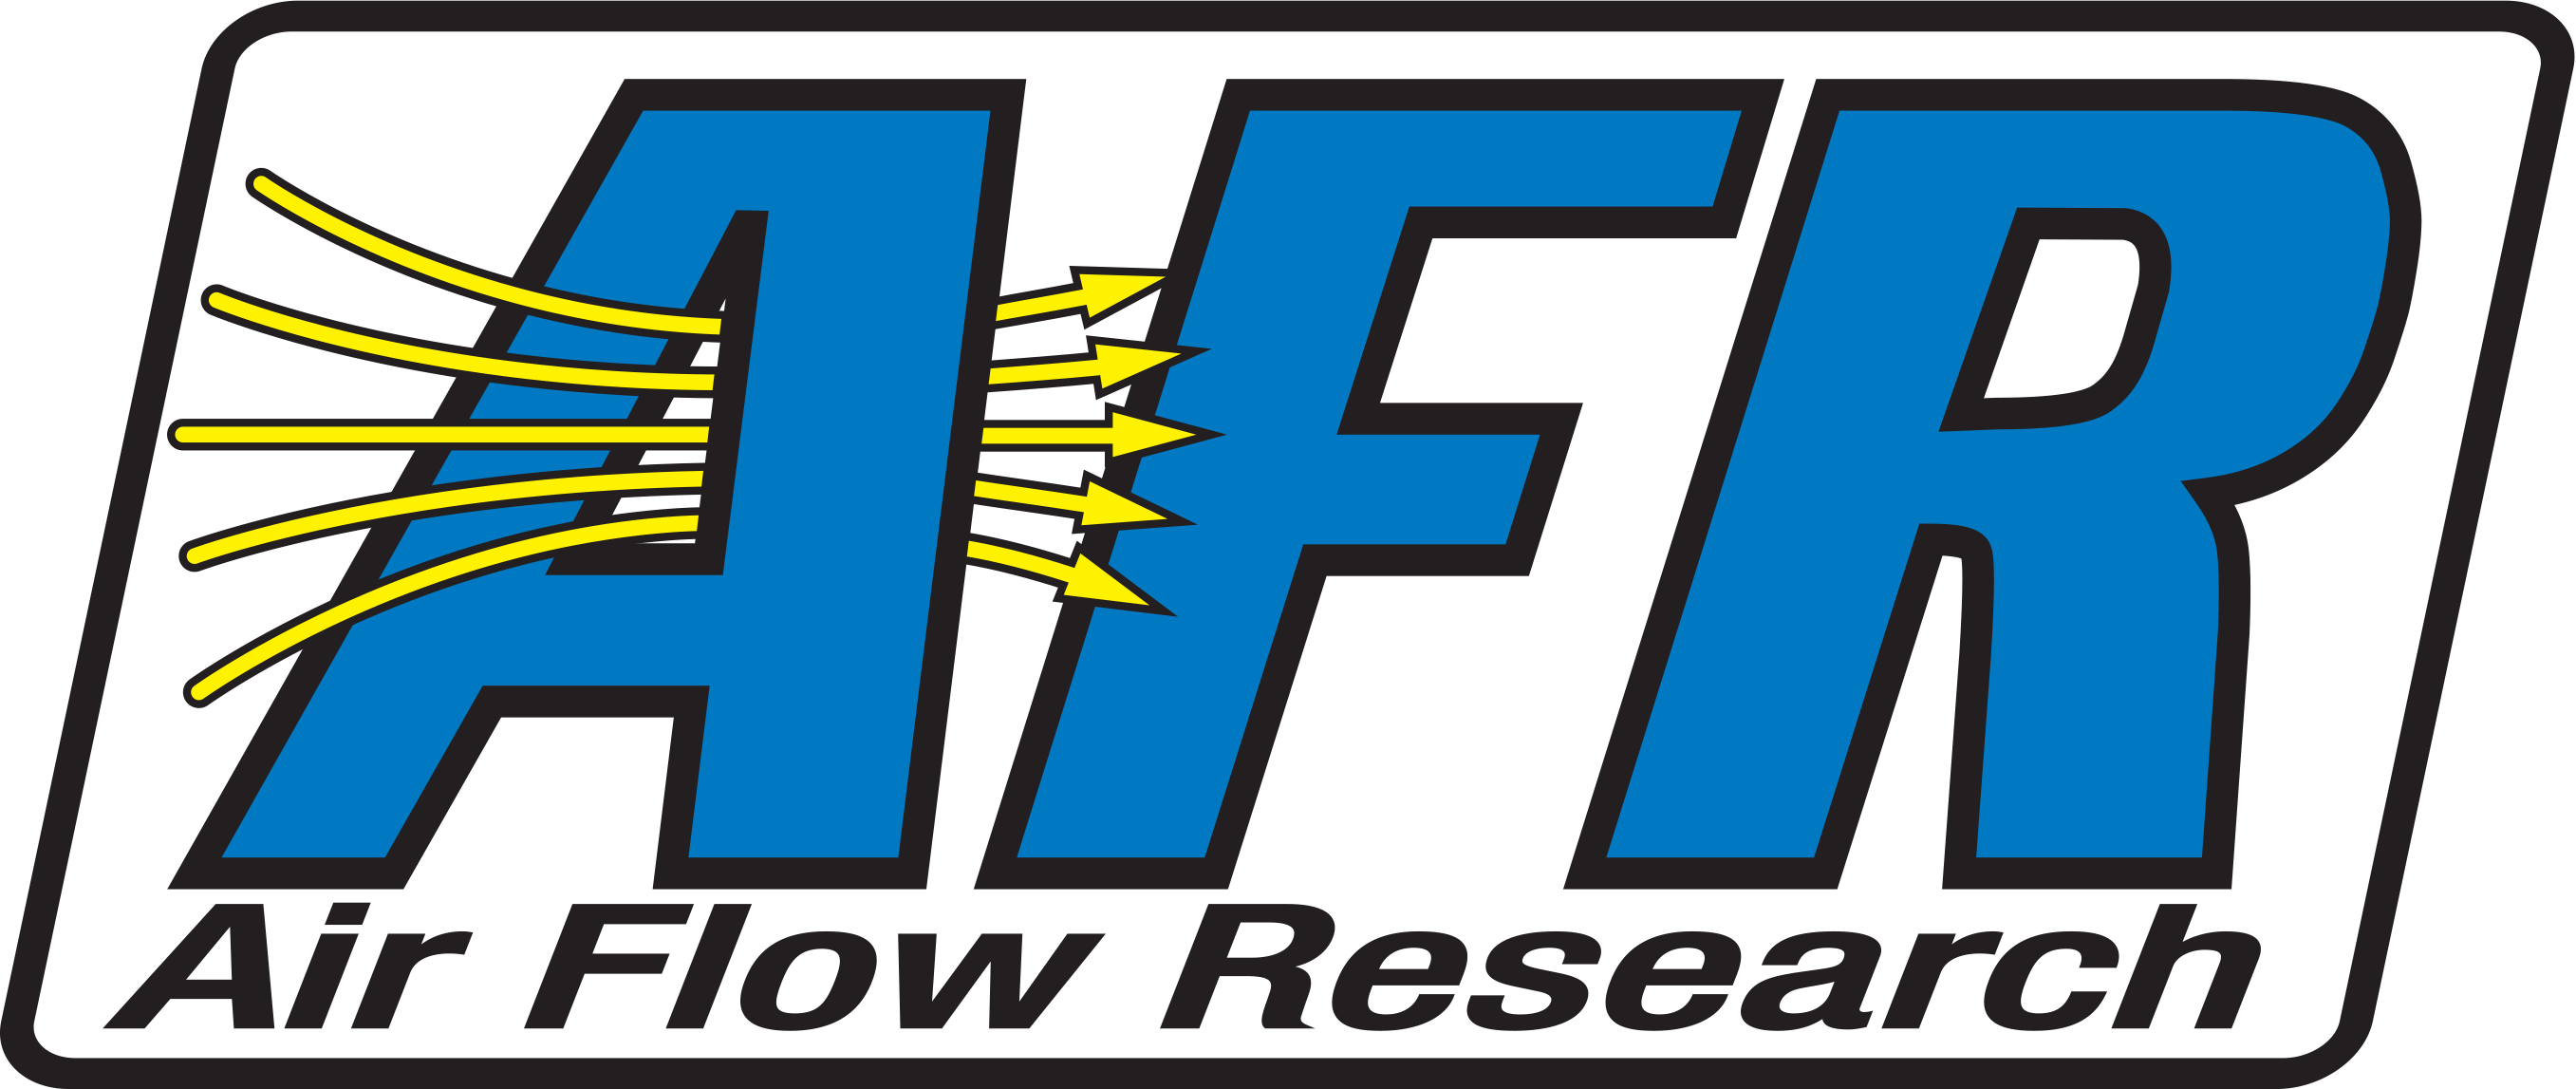 Air Flow Research (9700) Apparel/Promotional